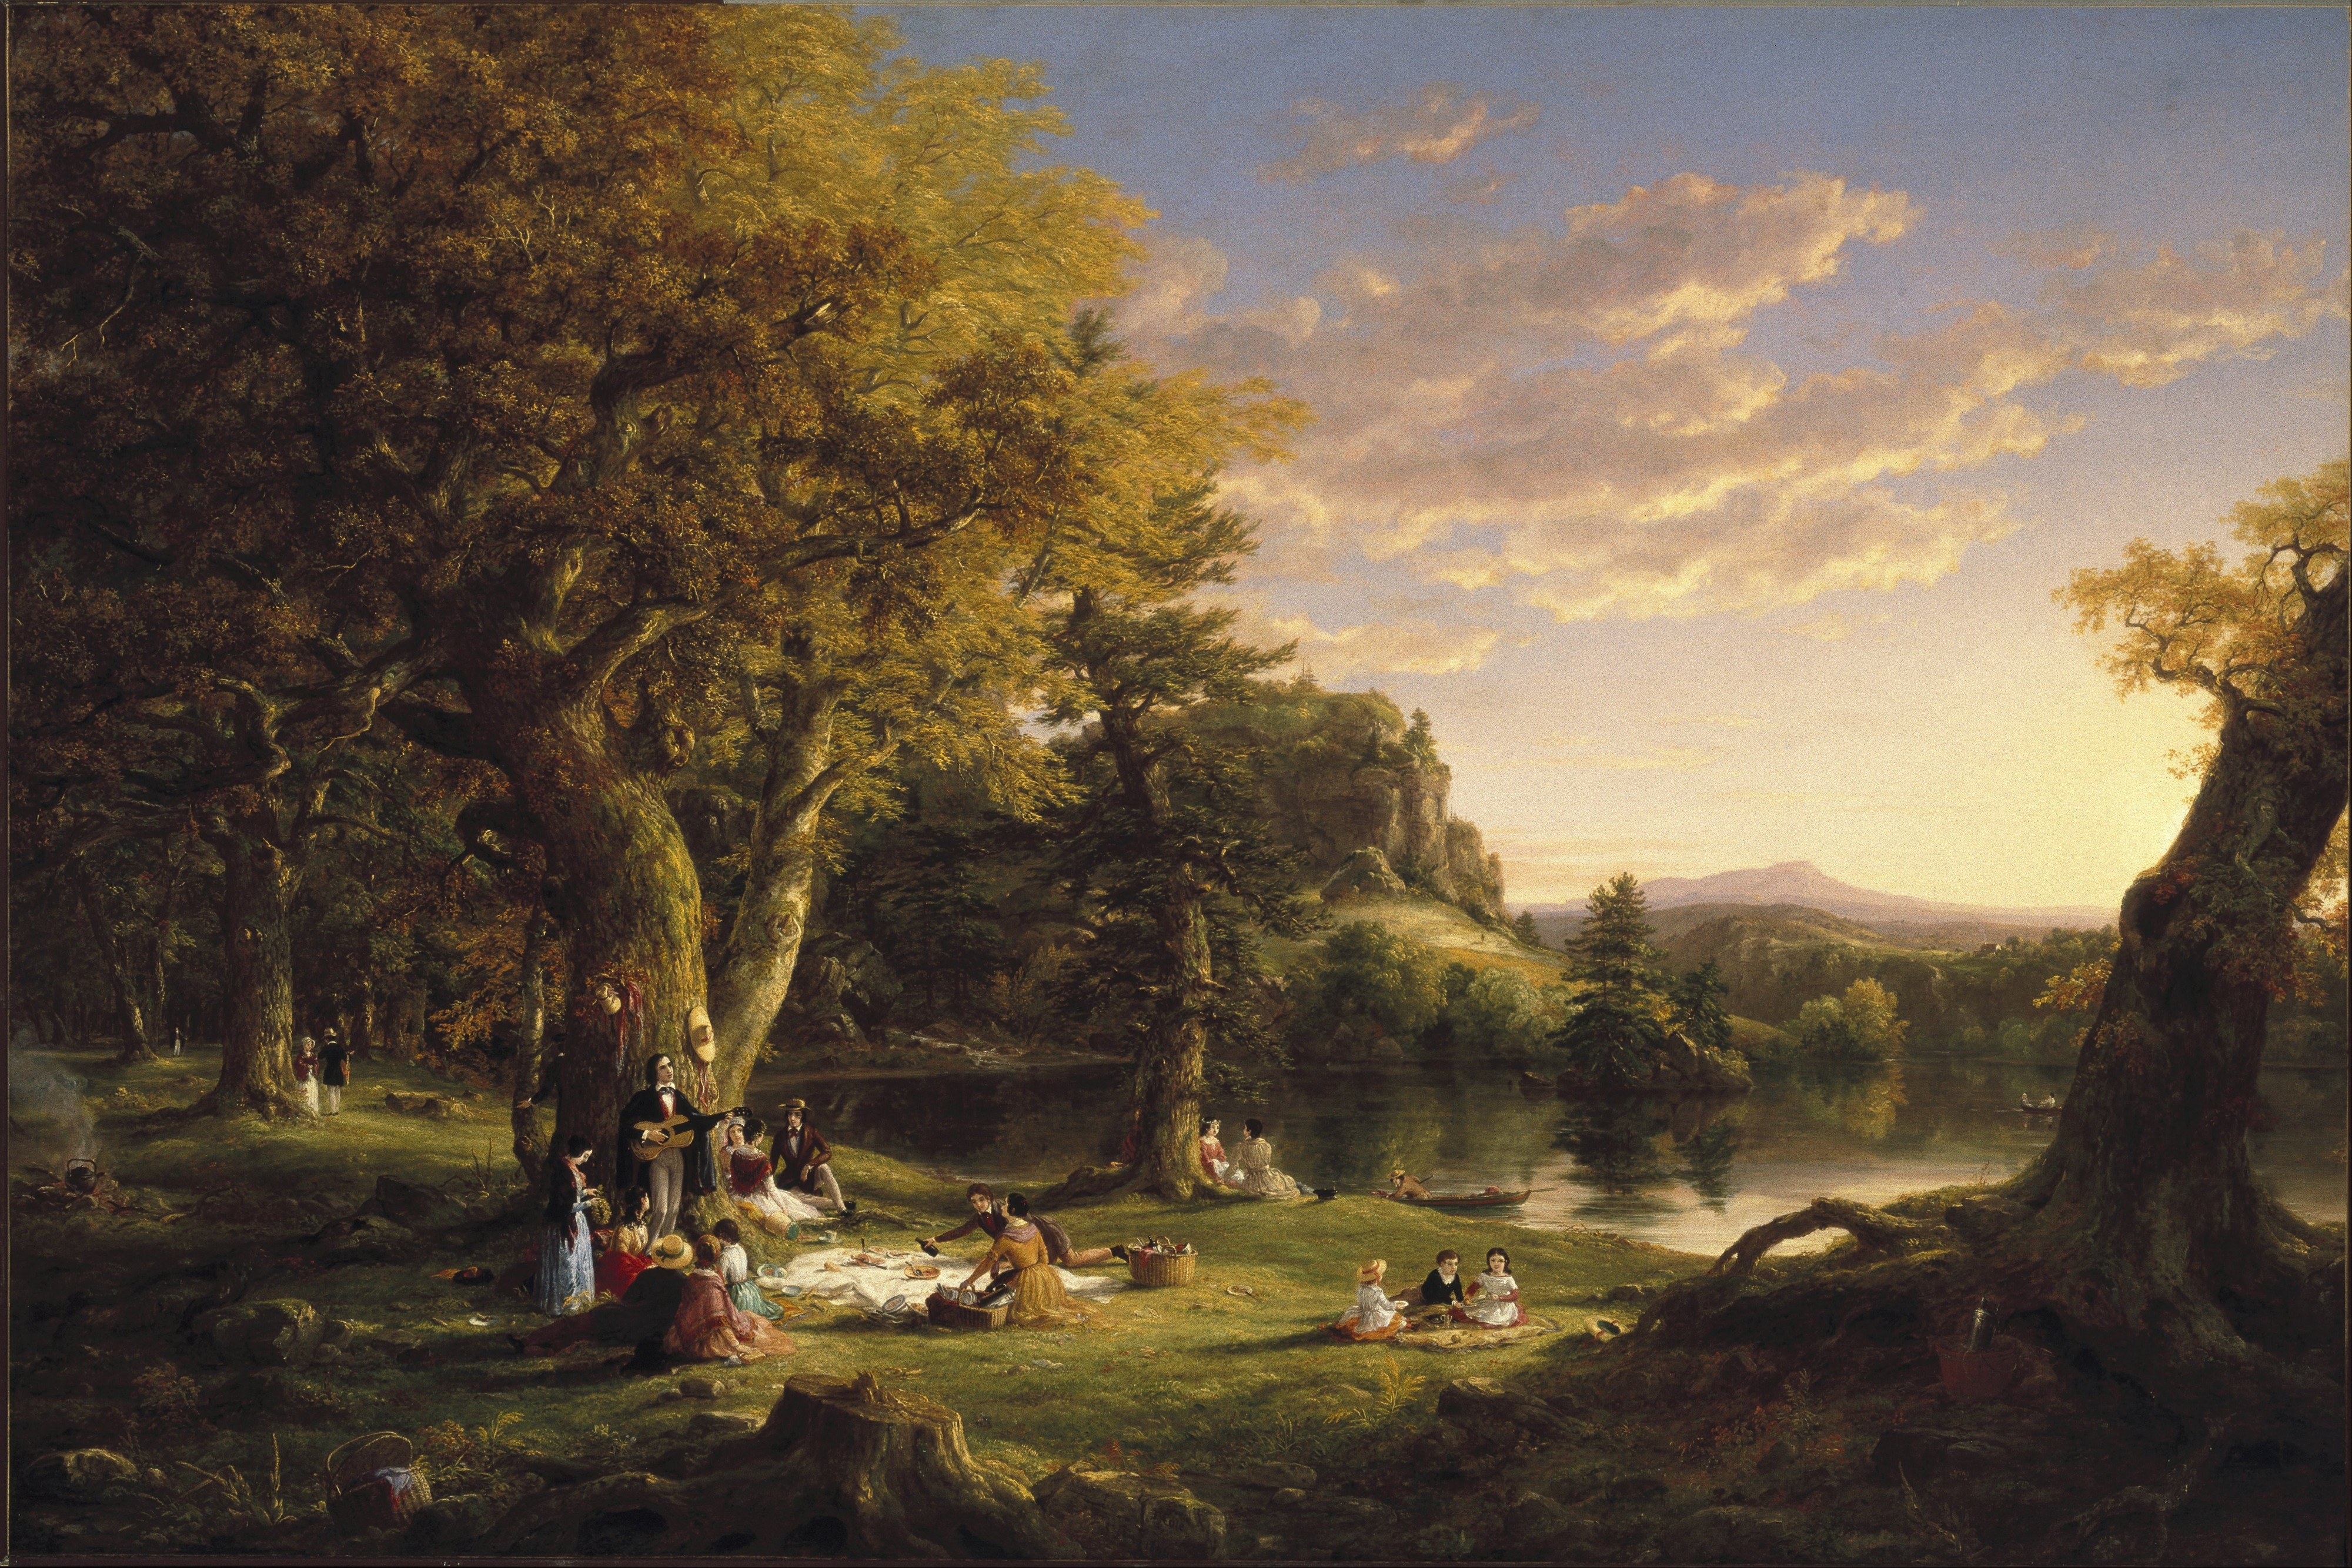 Thomas Cole - The Pic-Nic - Google Art Project